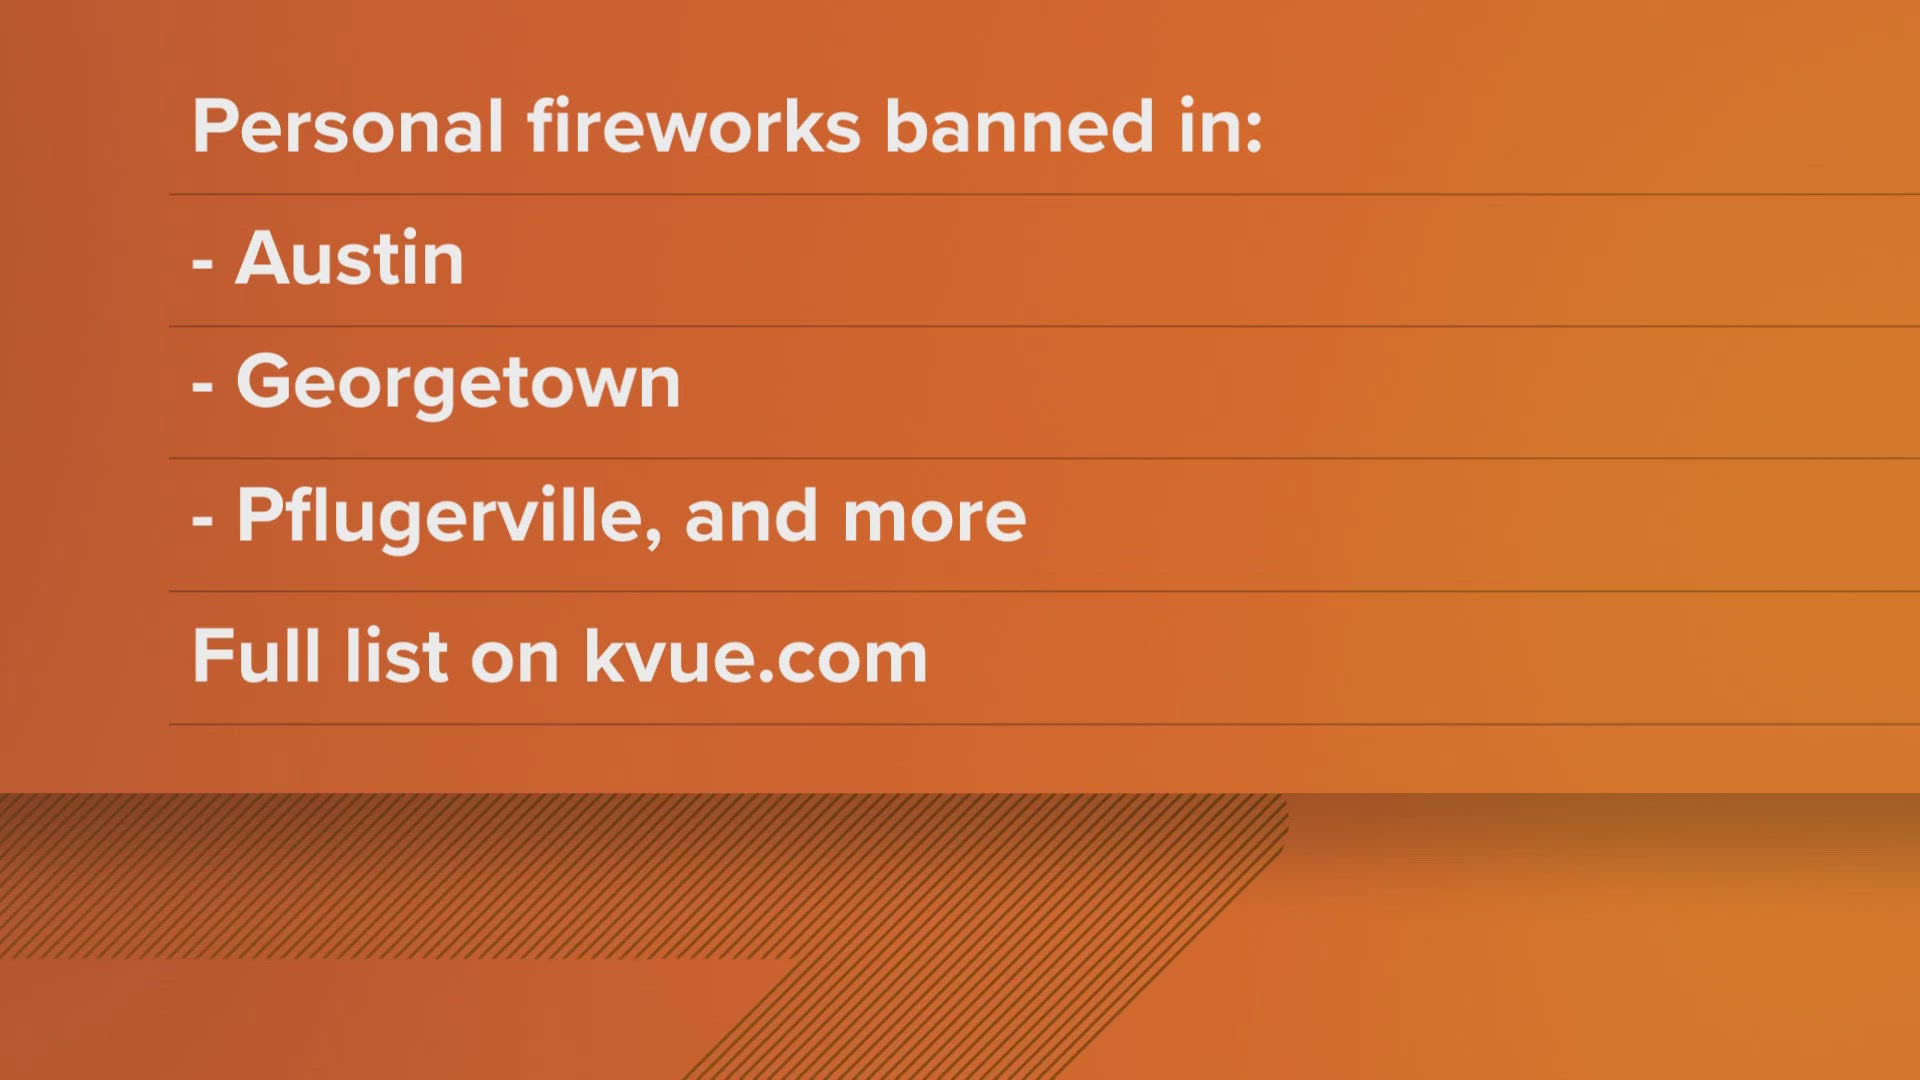 Before buying, selling or igniting personal fireworks, it's important to be aware of current rules.